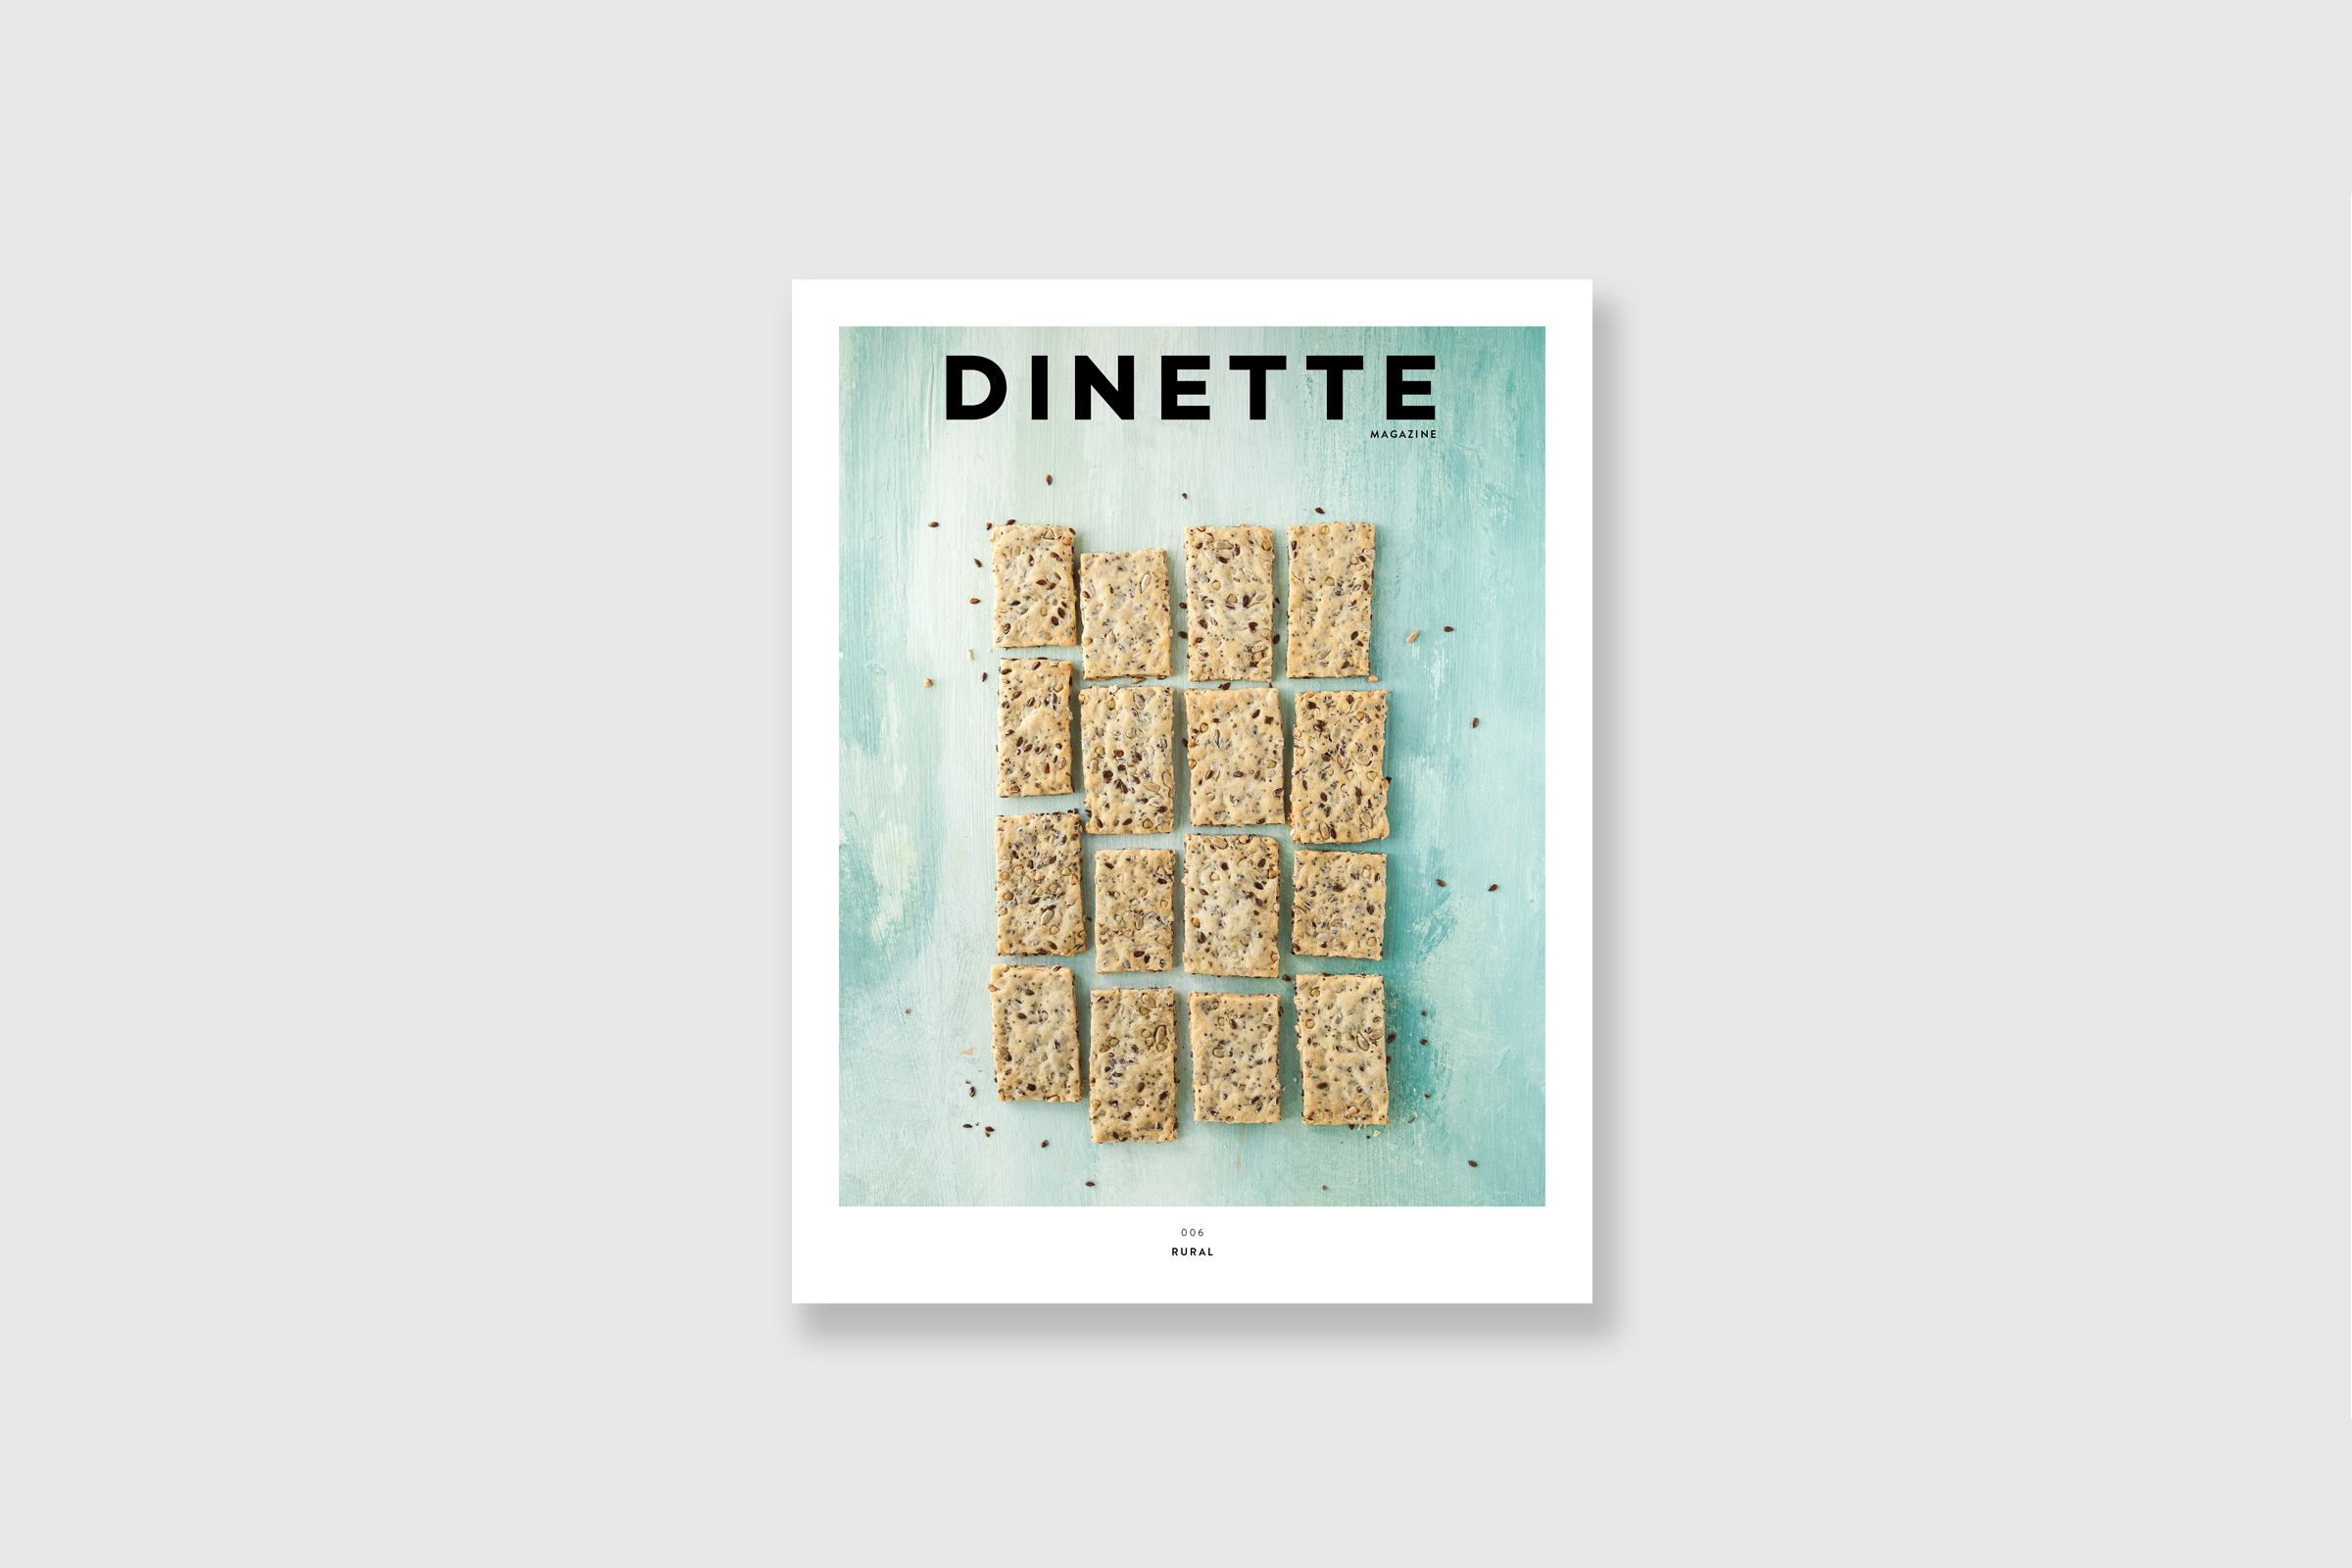 Subscription to Dinette Magazine (in French) but the photos speak by themselves - FOODIE GIFT IDEAS - THE ULTIMATE GIFT LIST FOR MODERN MEN